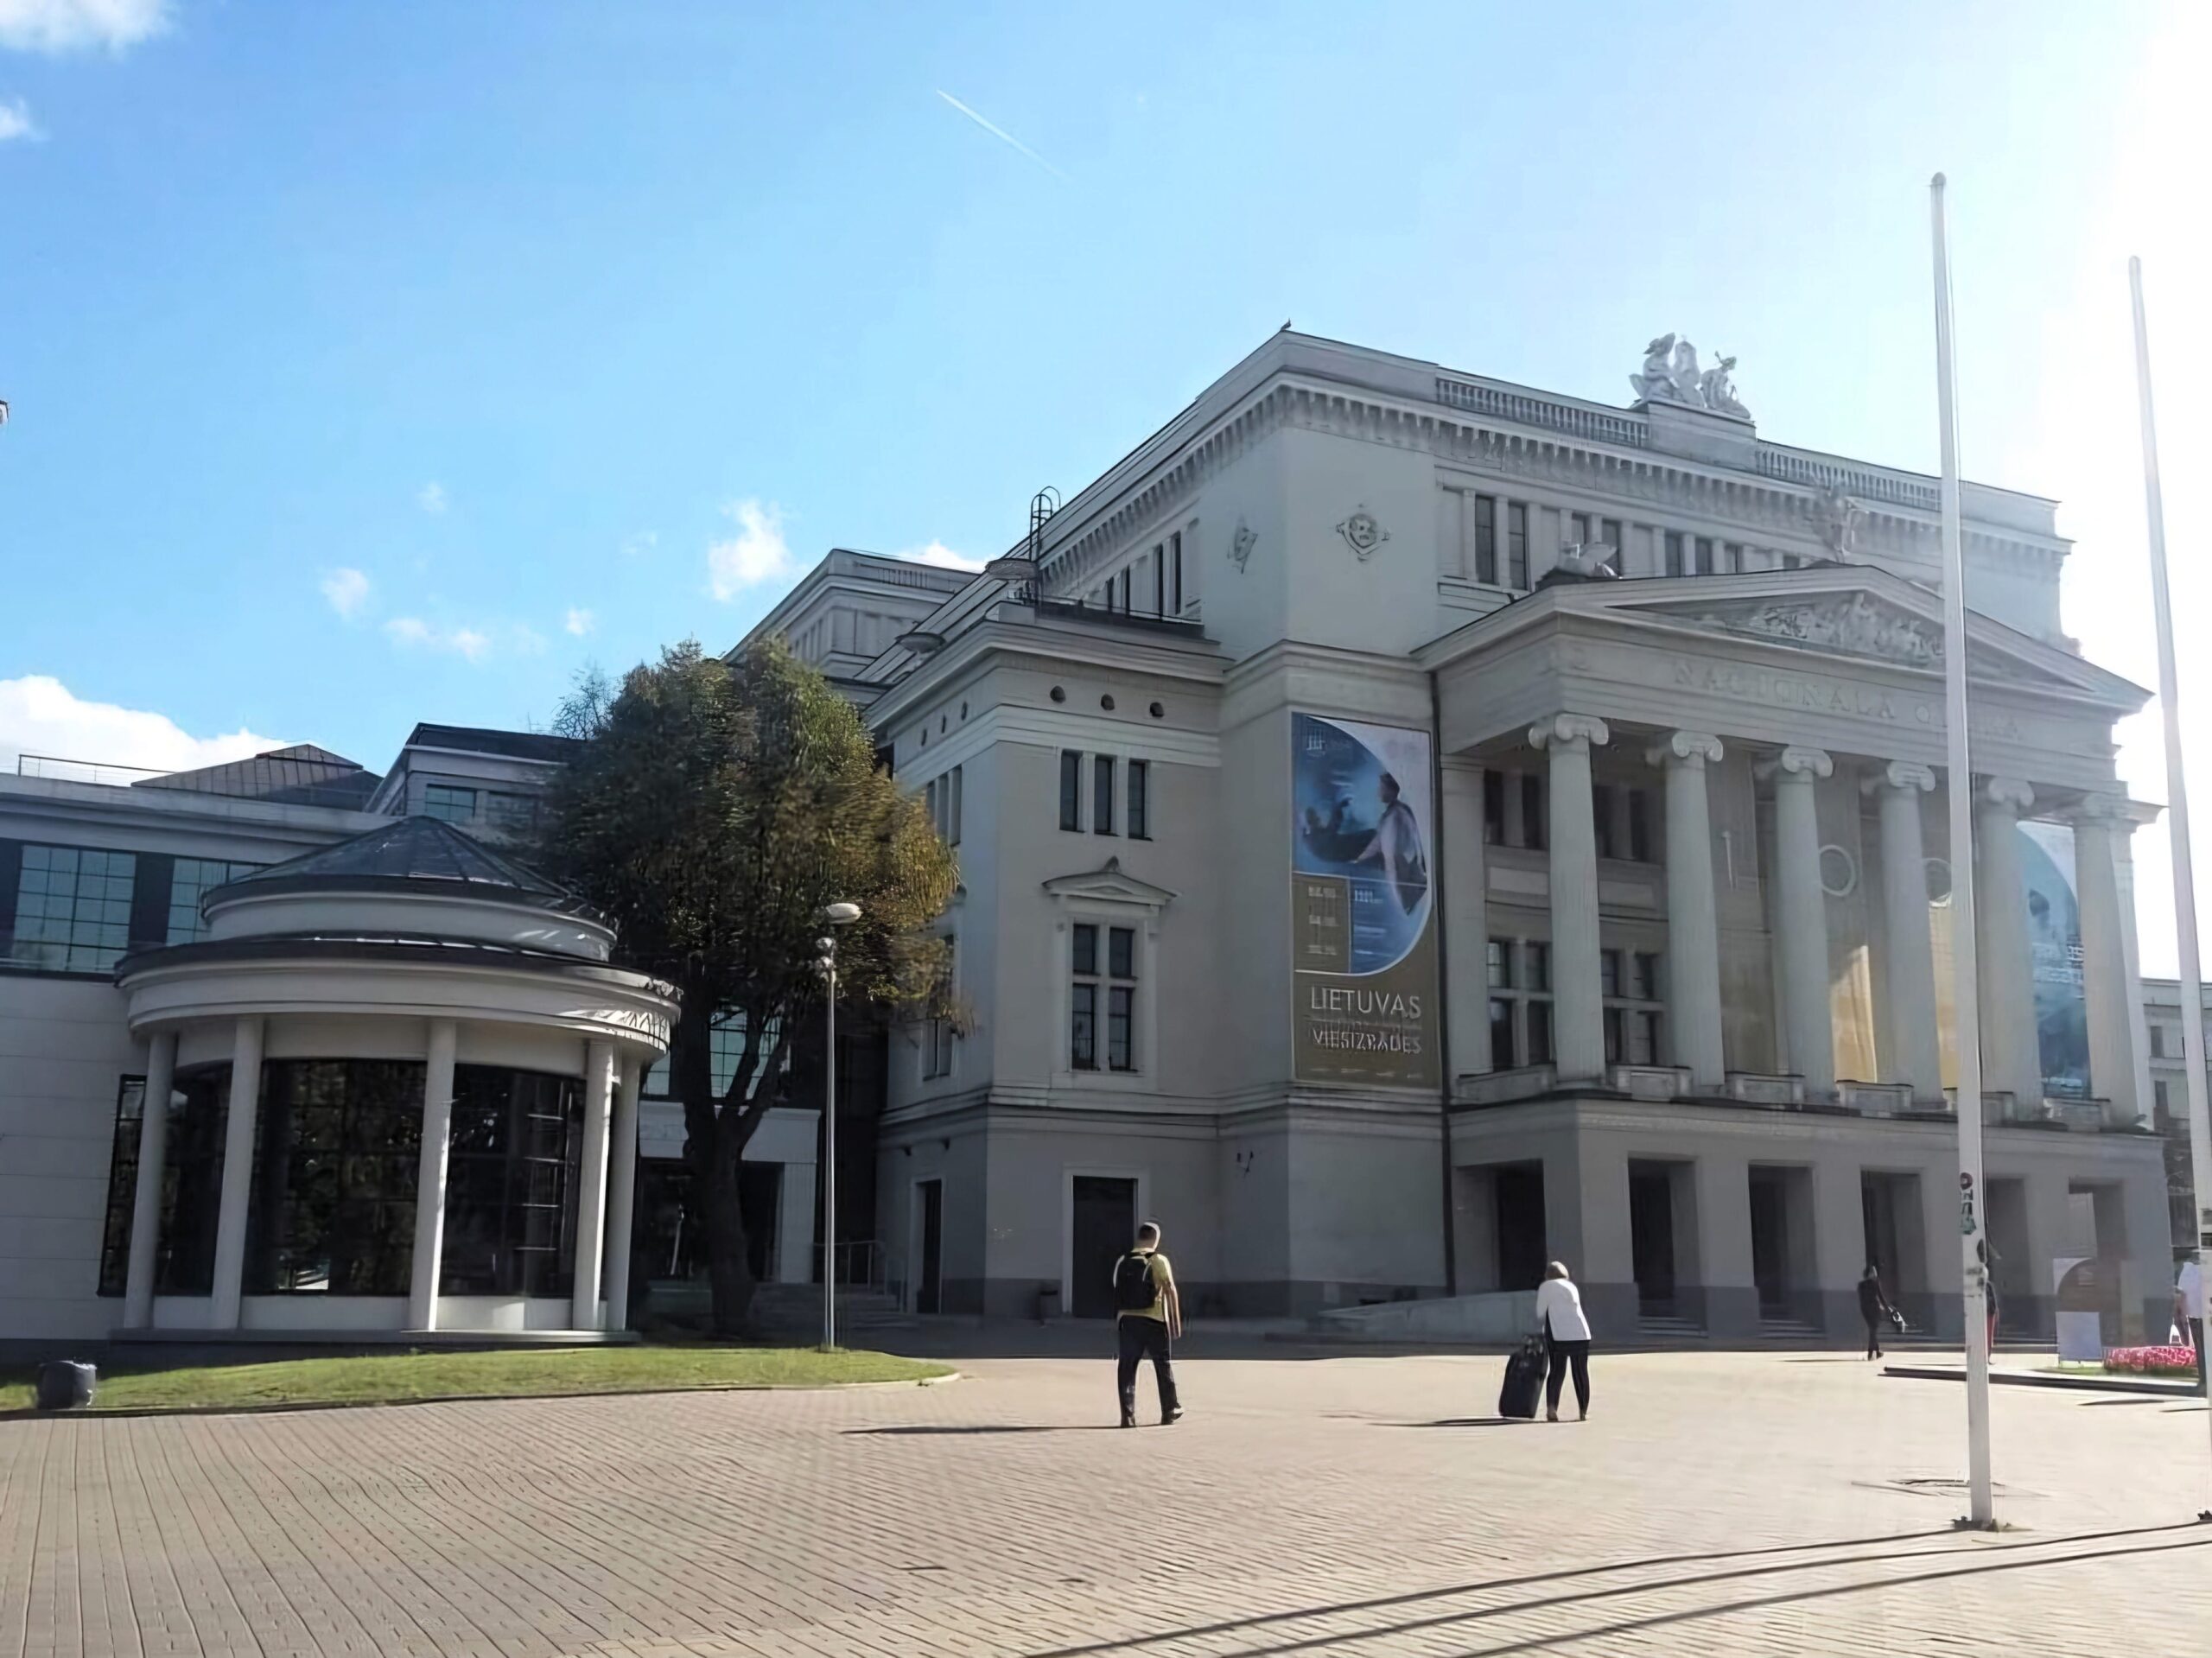 The White House of Riga - otherwise known as the Latvian National Opera House.